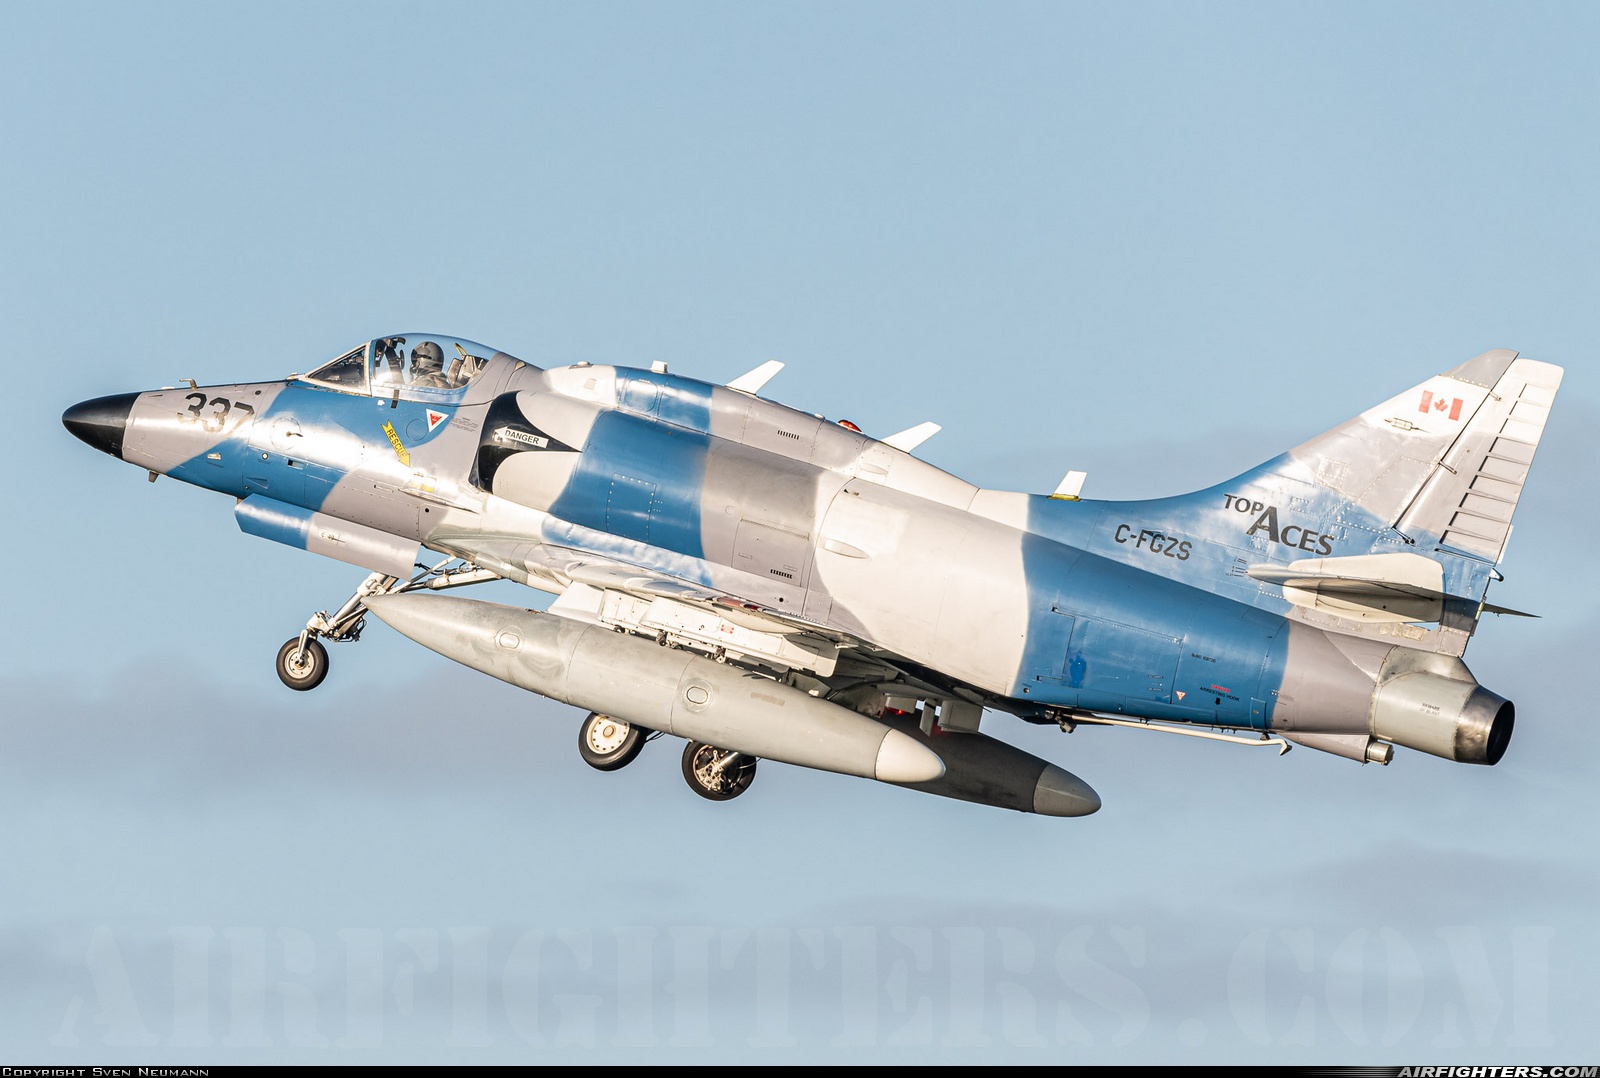 Company Owned - Top Aces (ATSI) Douglas A-4N Skyhawk C-FGZS at Wittmundhafen (Wittmund) (ETNT), Germany